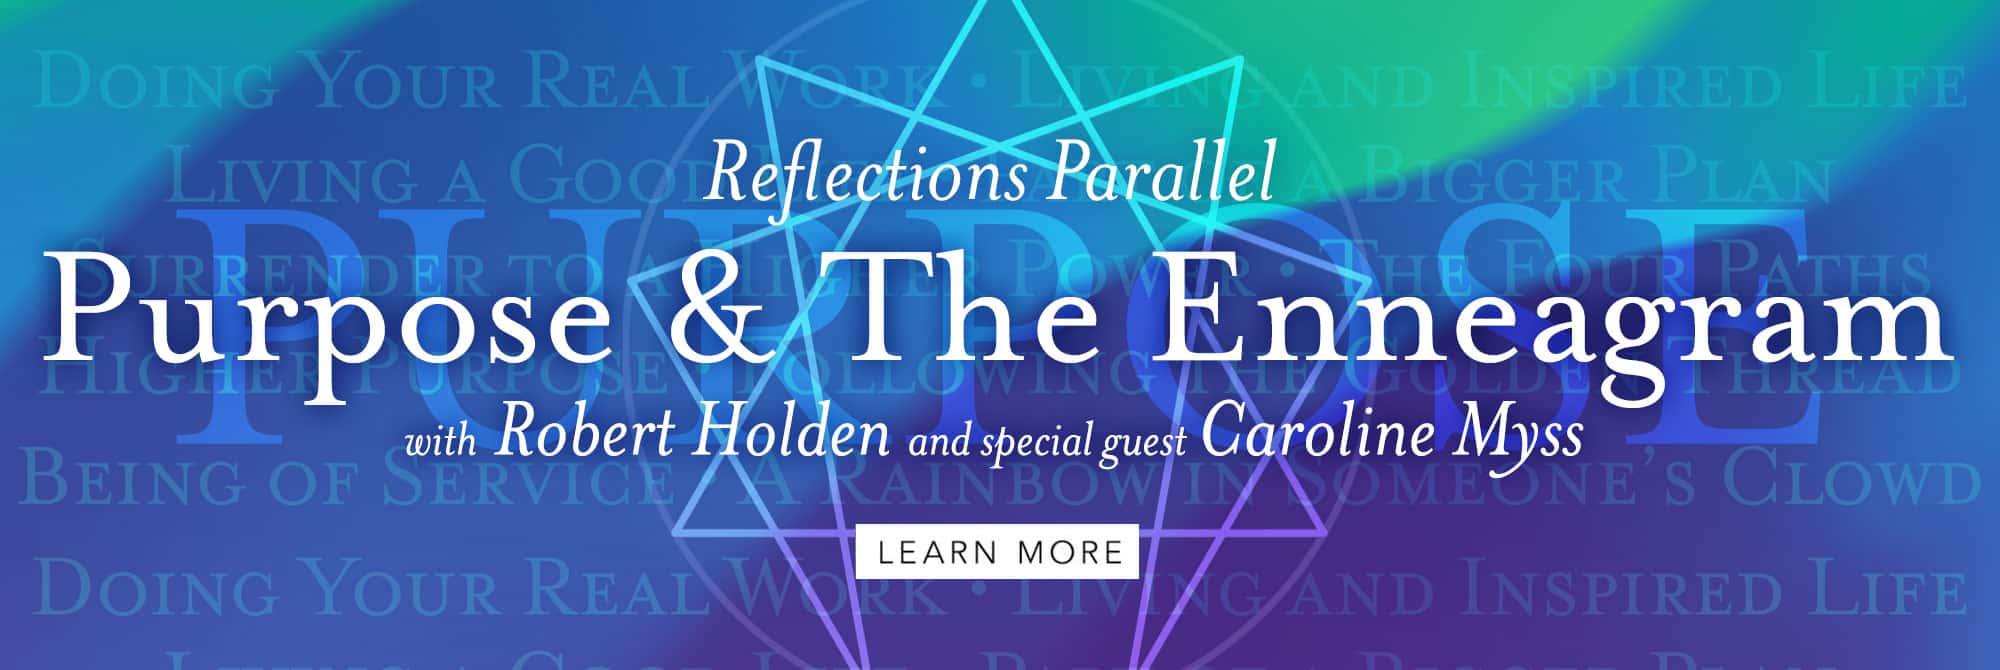 Reflections Parallel "Purpose & The Enneagram" with Robert Holden and special guest Caroline Myss